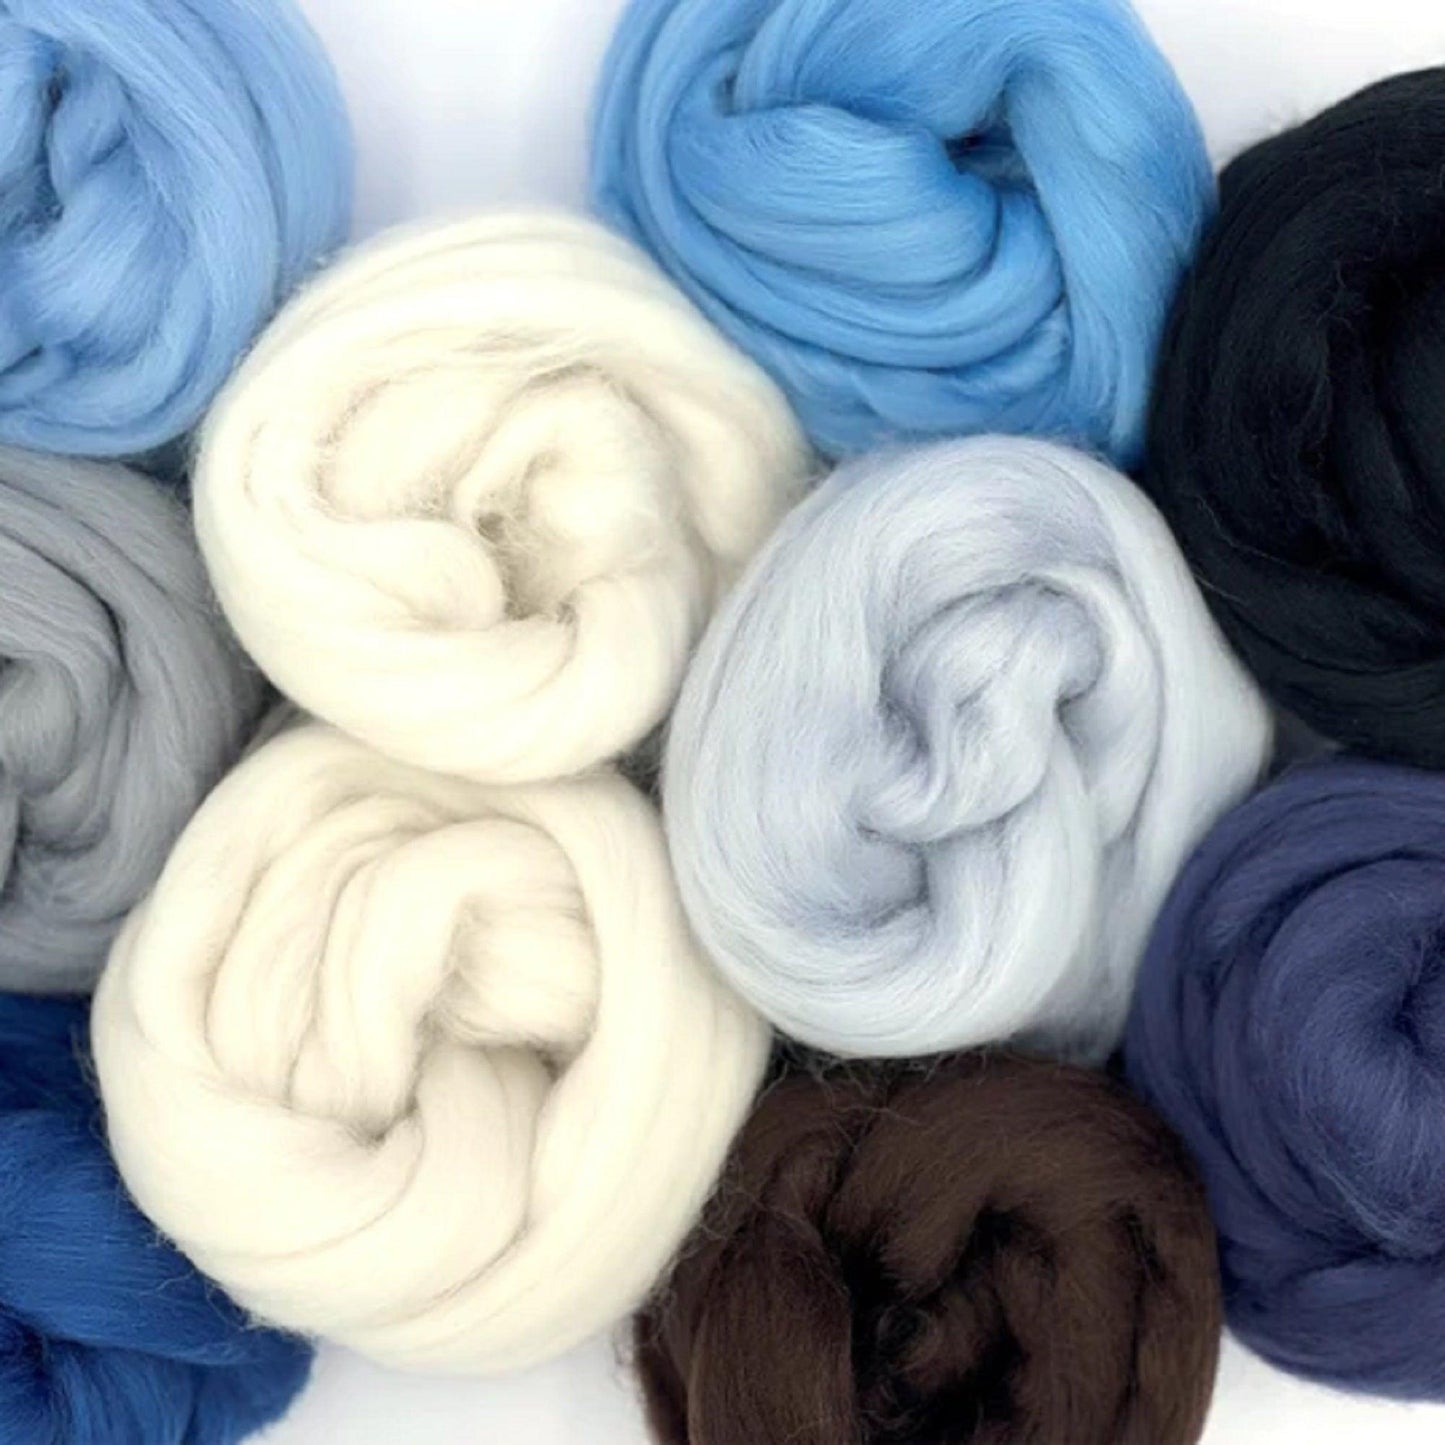 Mixed Merino Wool Variety Pack | Glacier Chill (Multicolored) 250 Grams, 23 Micron